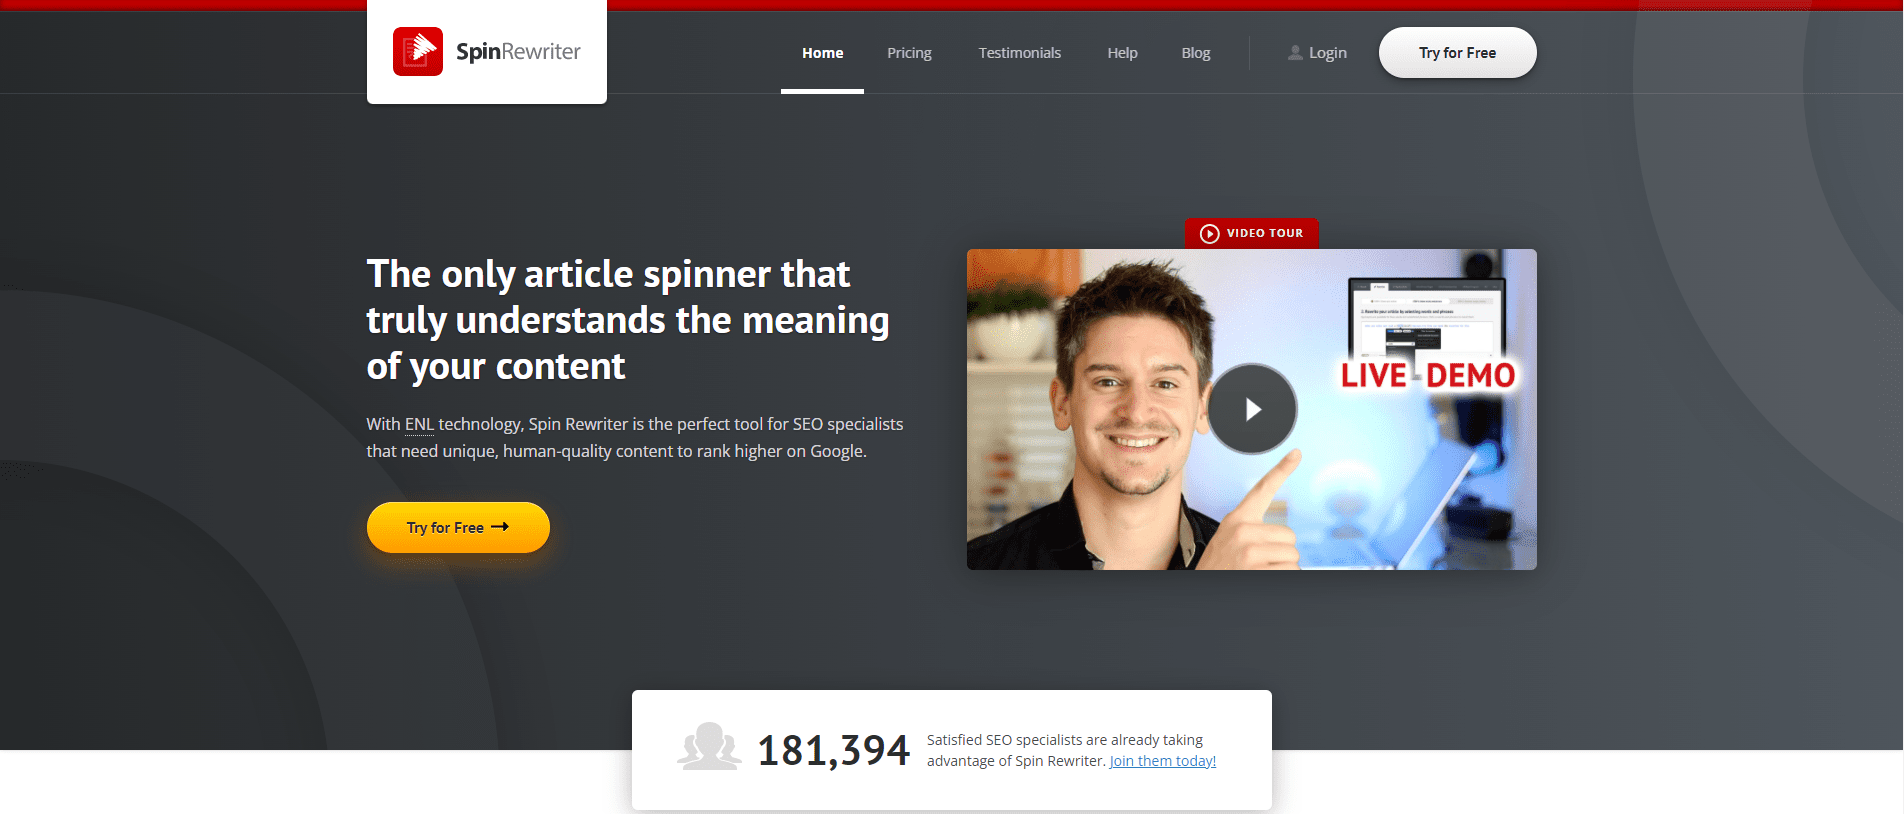 Spin Rewriter Review 2022: Is It The Best Content Spinner?